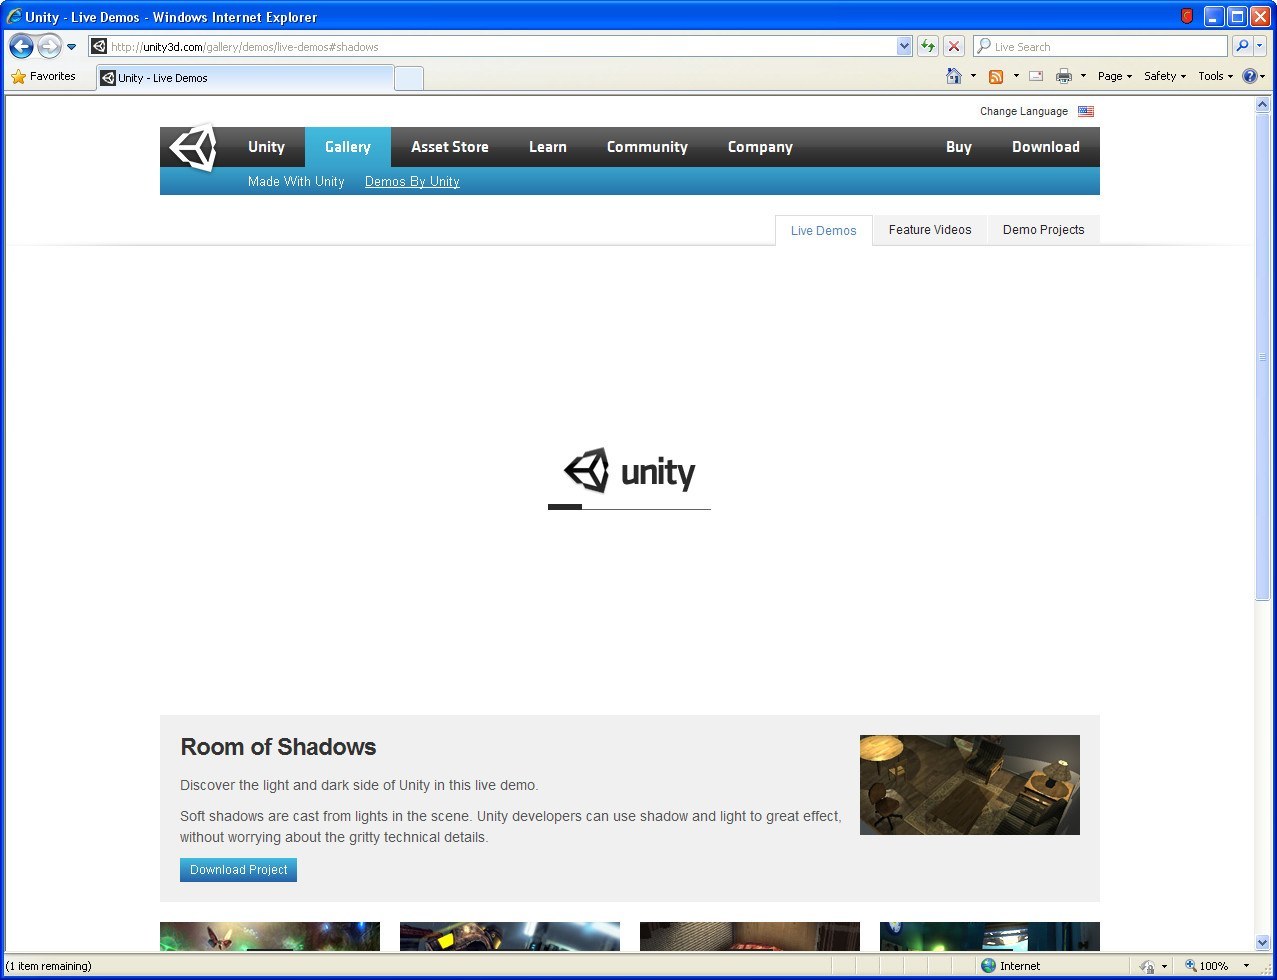 unity web player 2 player games